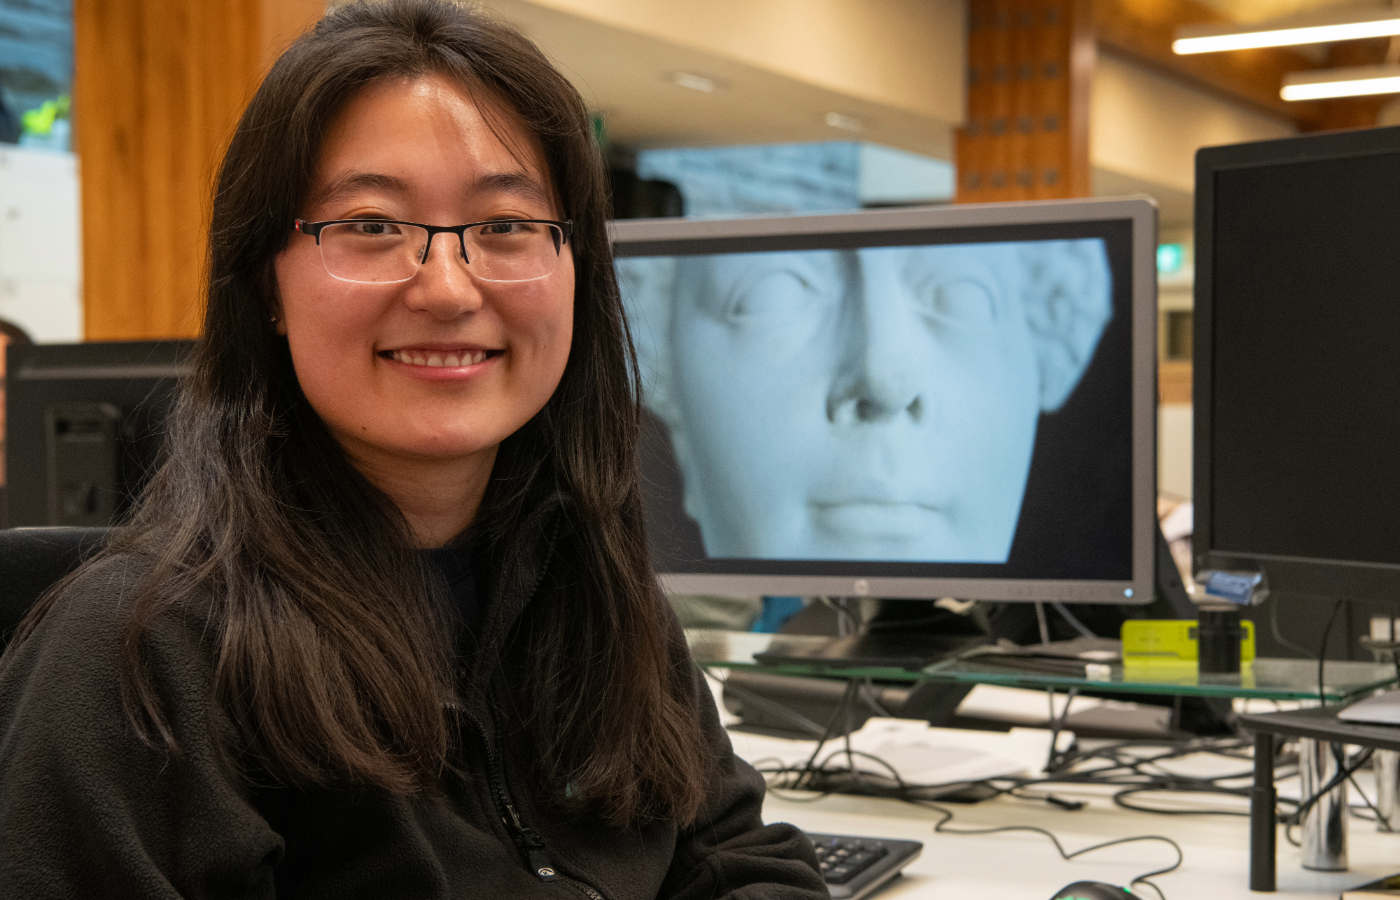 Yueqian Wang, Digital Innovation trainee, has created the digital model of the death mask as part of her training at HES.